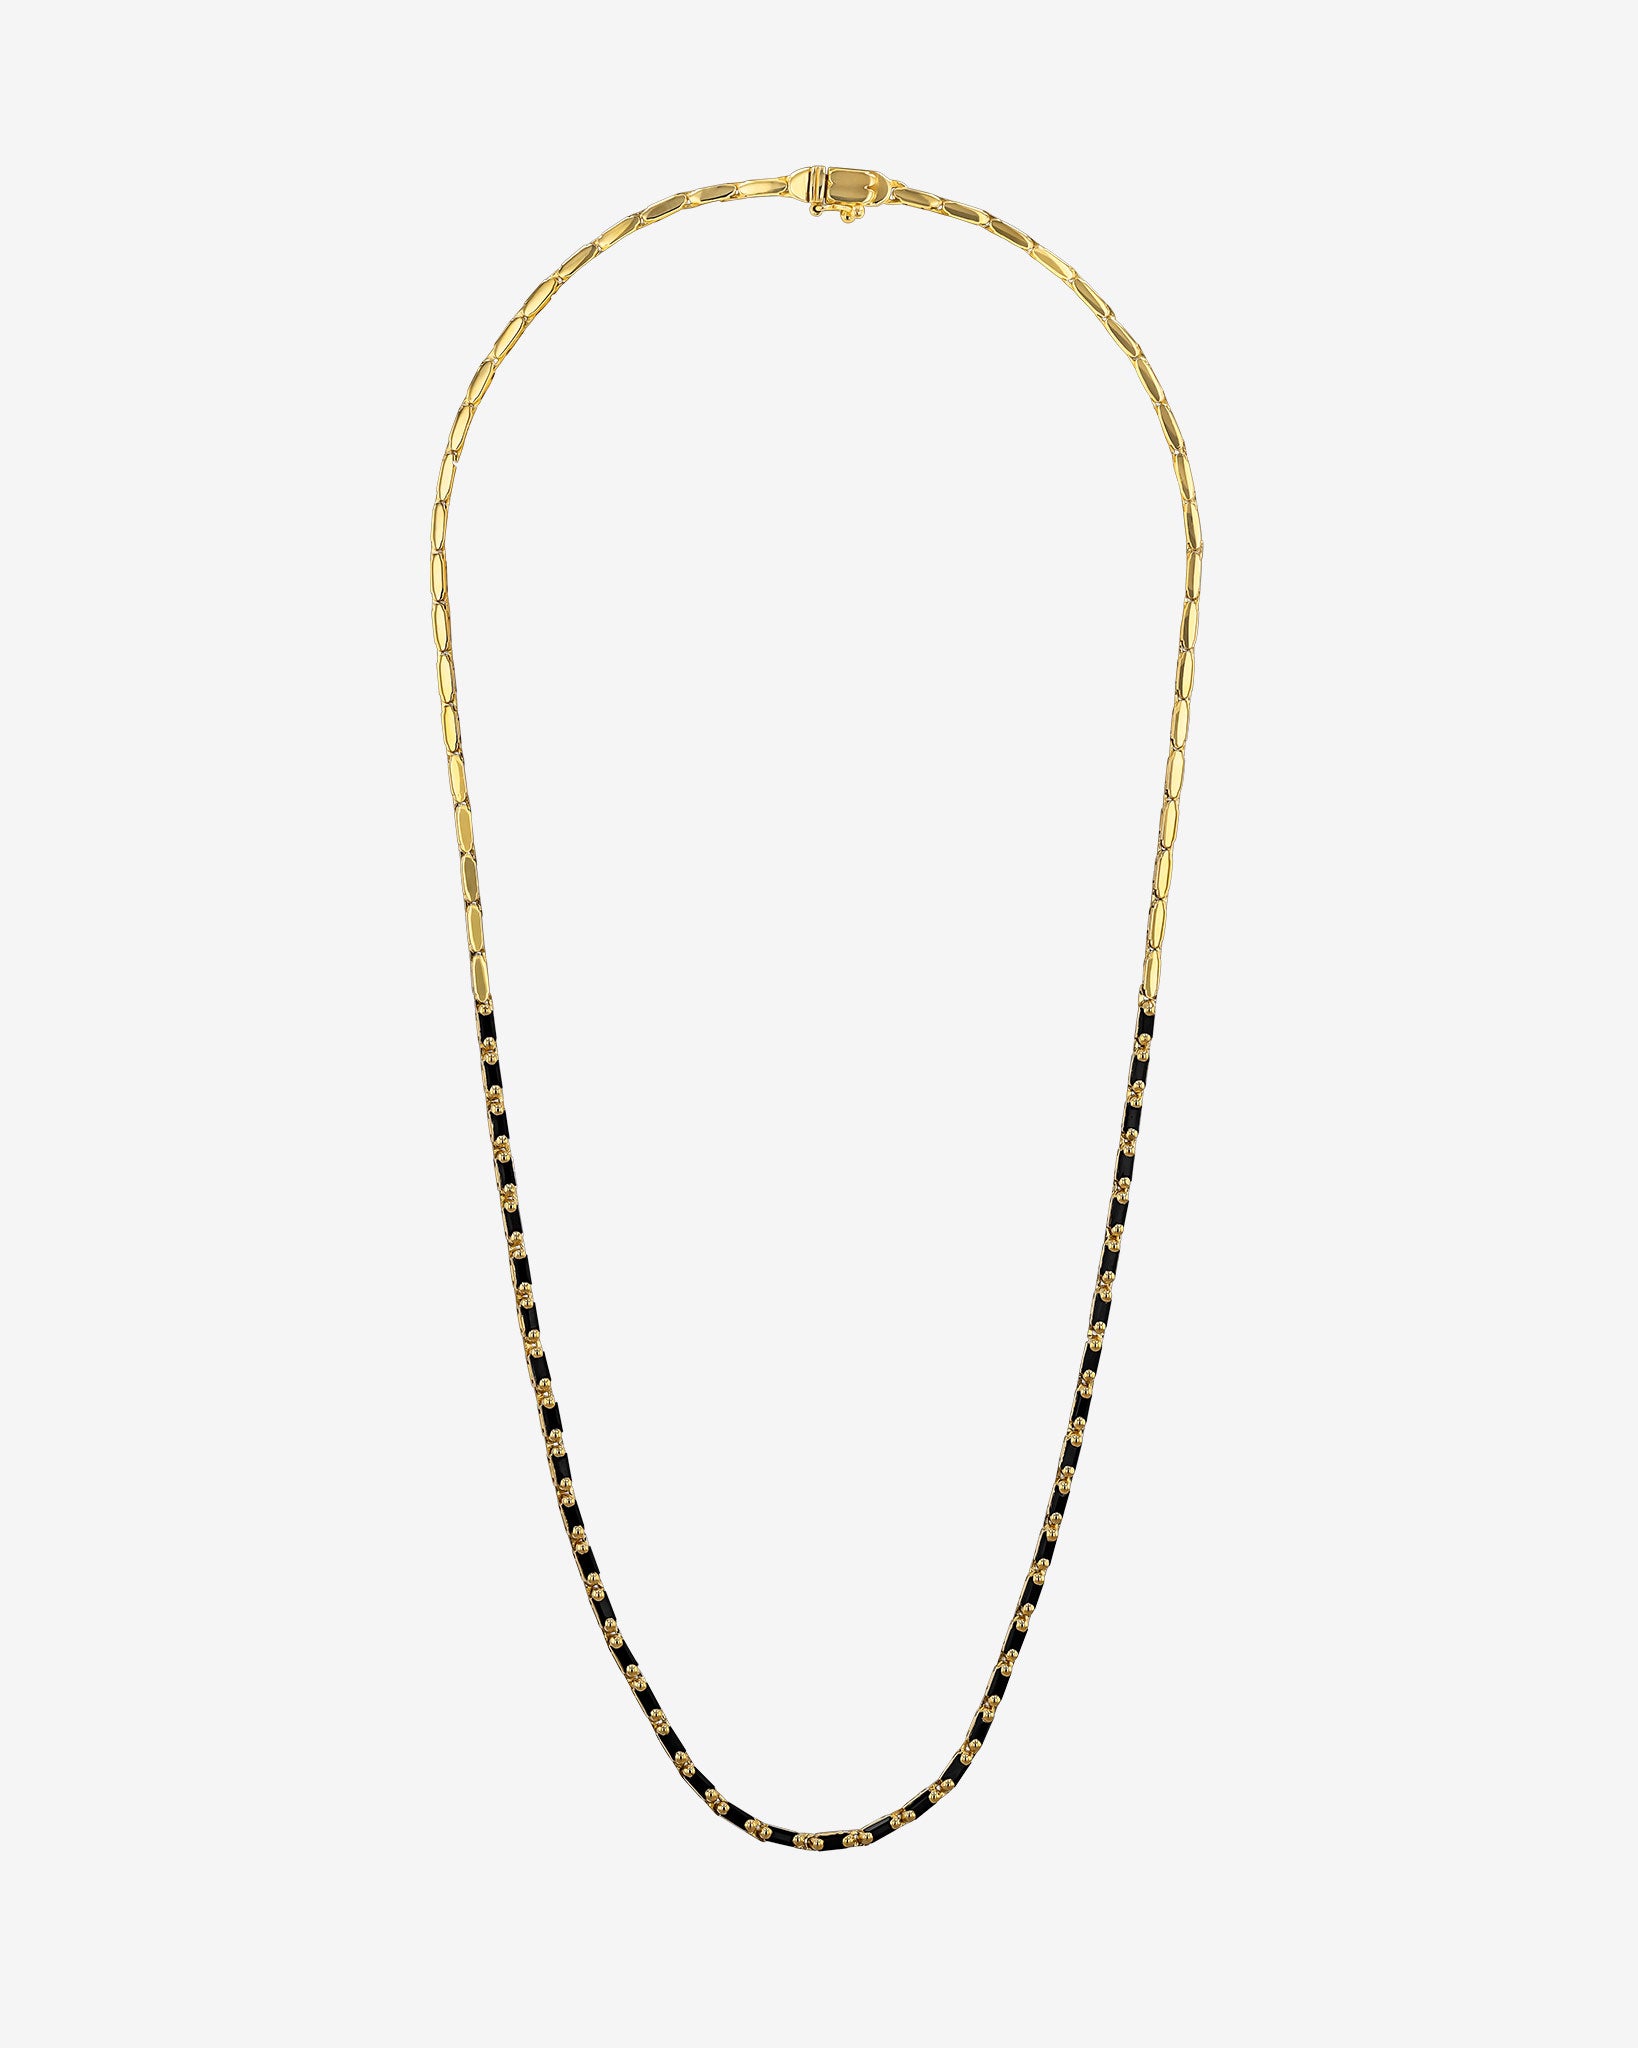 Suzanne Kalan Linear Half Black Sapphire Tennis Necklace in 18k yellow gold